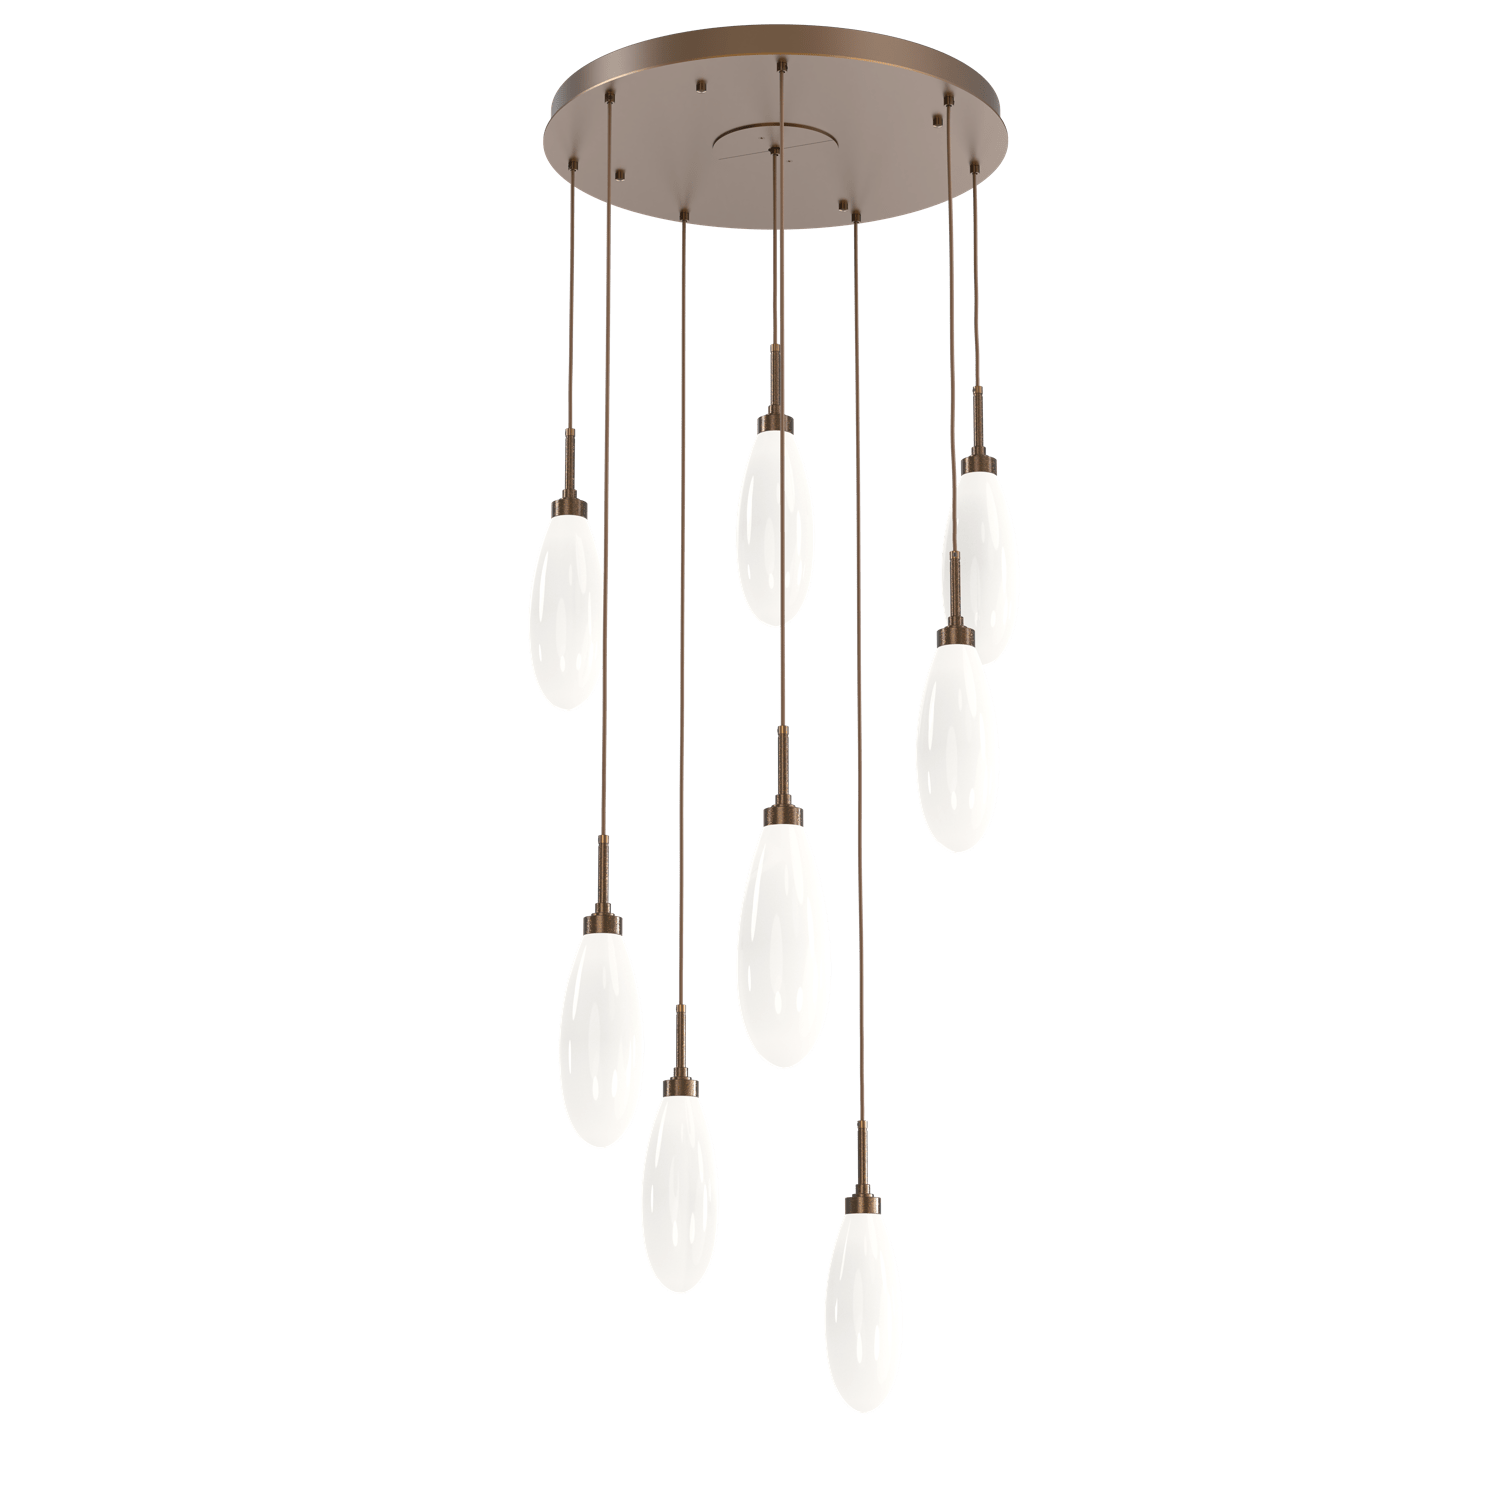 CHB0071-08-FB-WL-LL-Hammerton-Studio-Fiori-8-light-round-pendant-chandelier-with-flat-bronze-finish-and-opal-white-glass-shades-and-LED-lamping